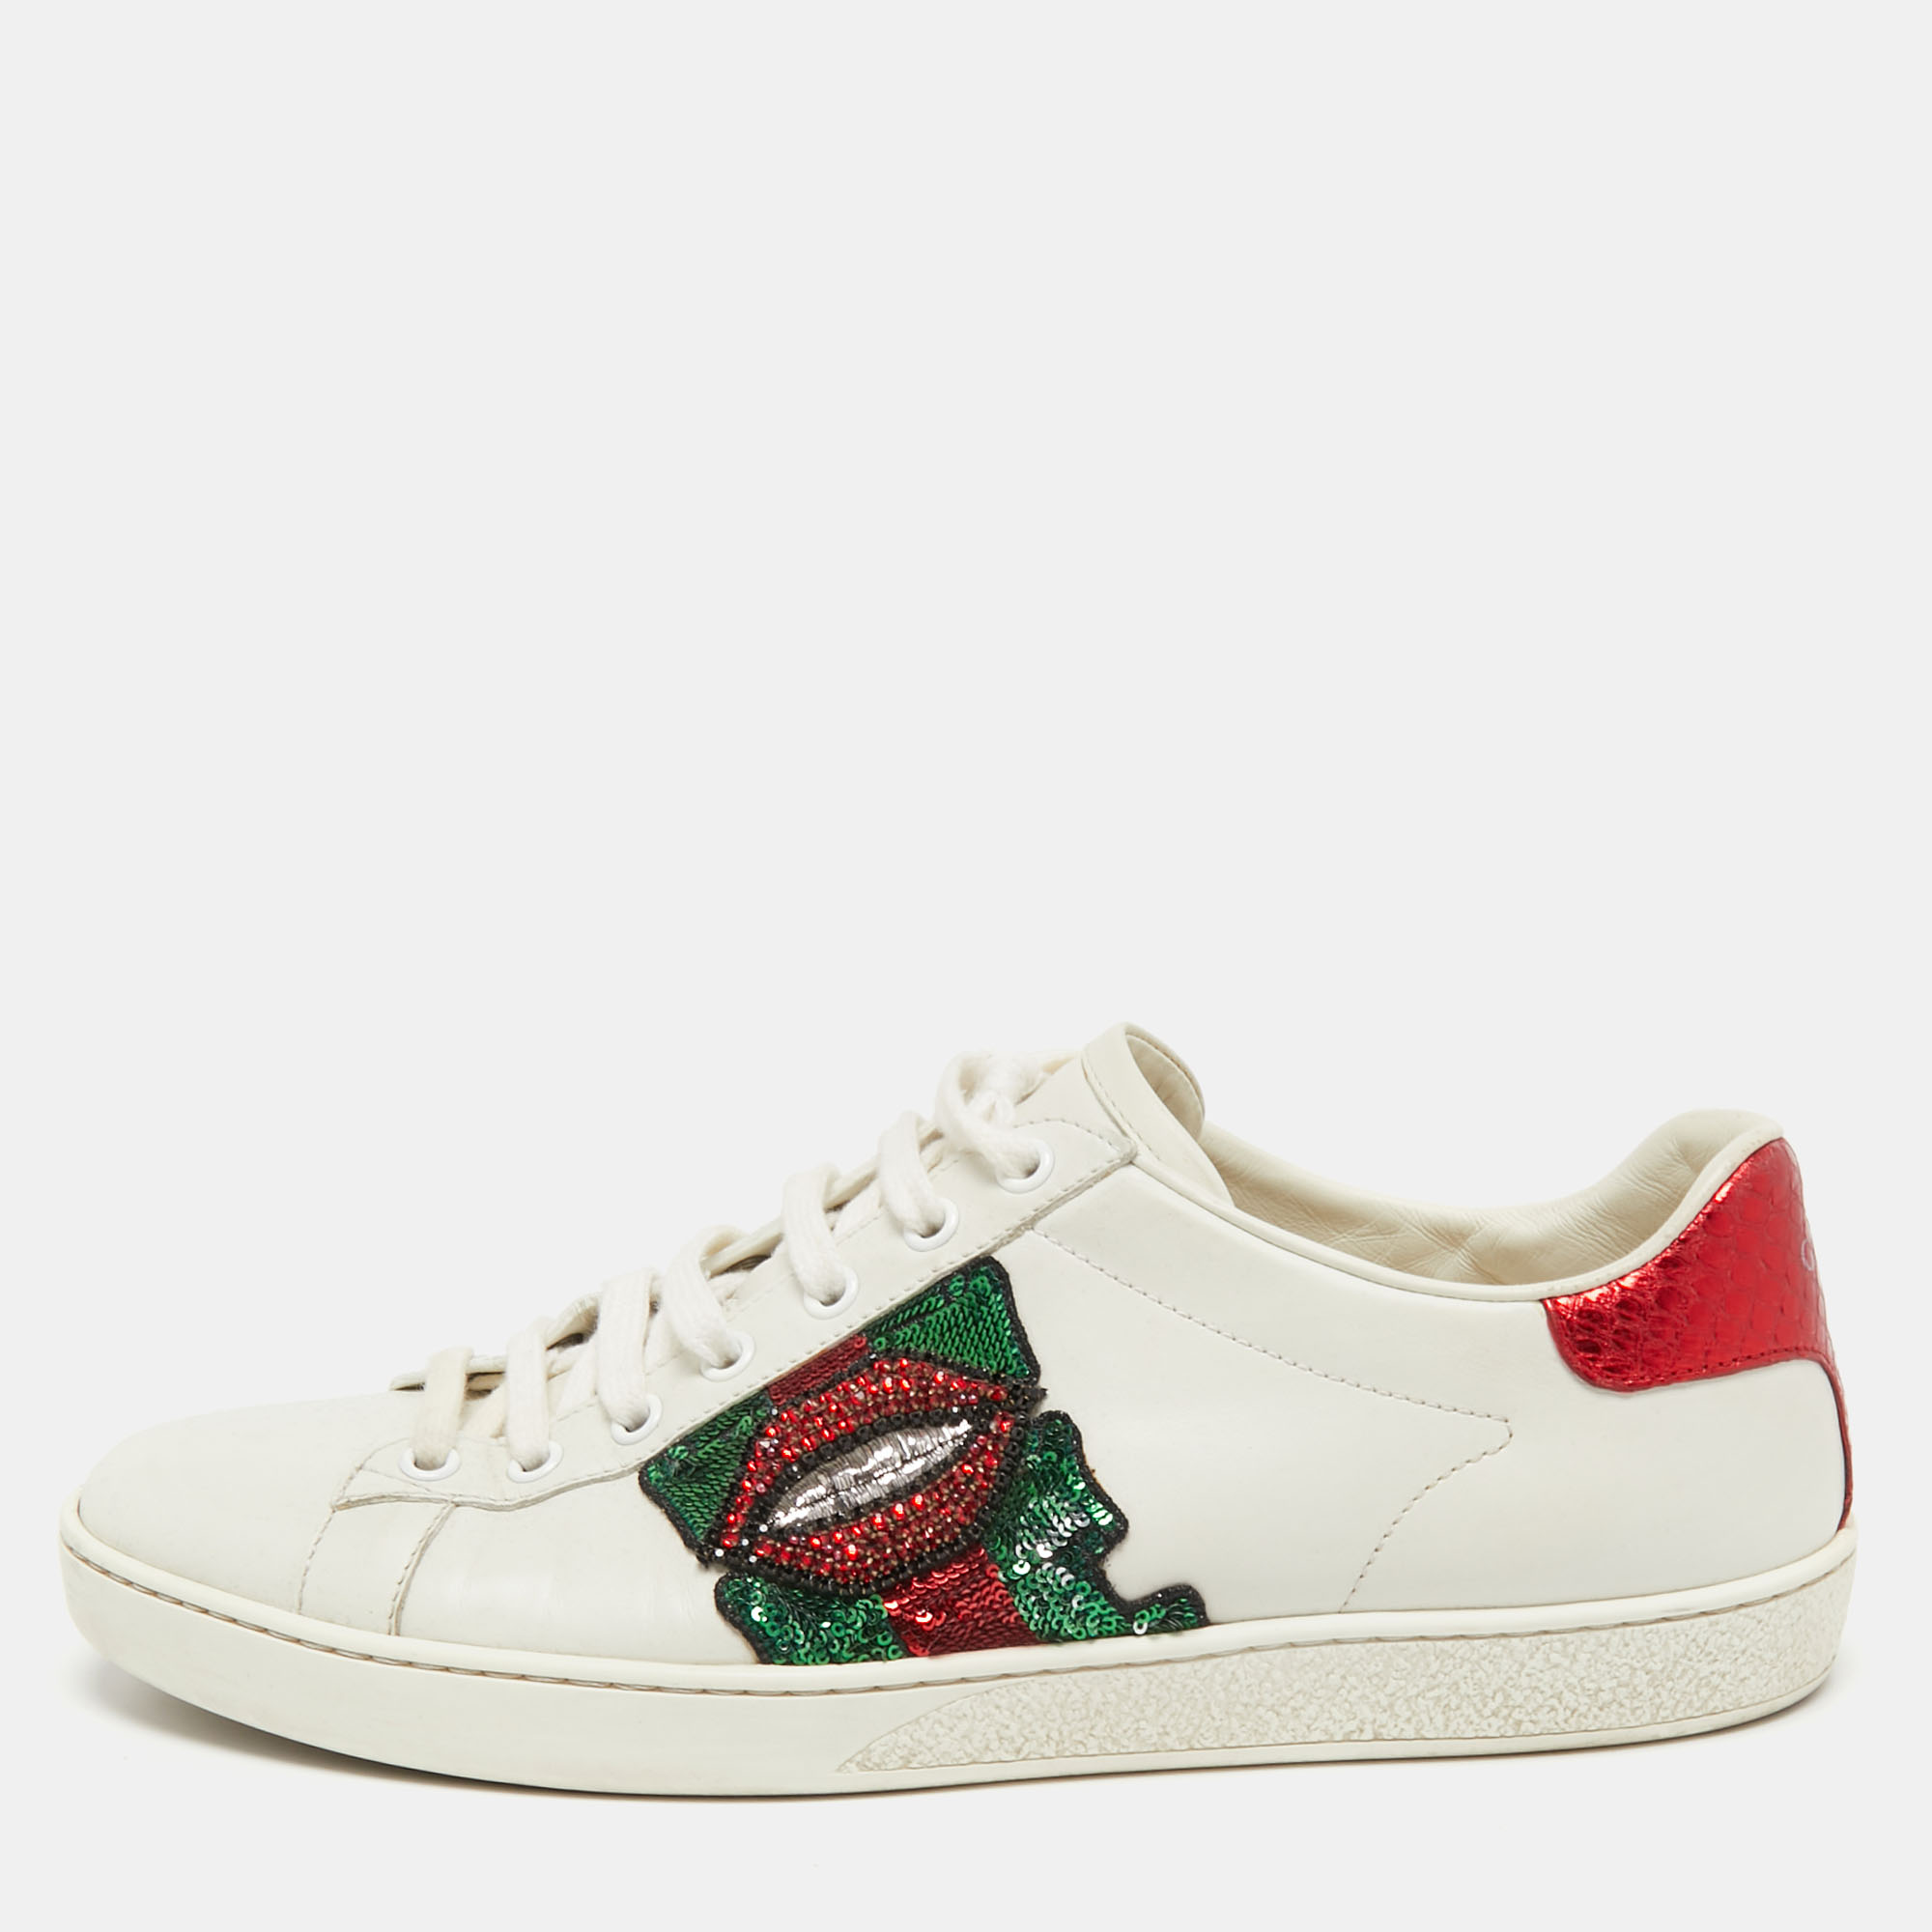 Pre-owned Gucci White Leather Sequin Lips Ace Low Top Sneakers Size 41